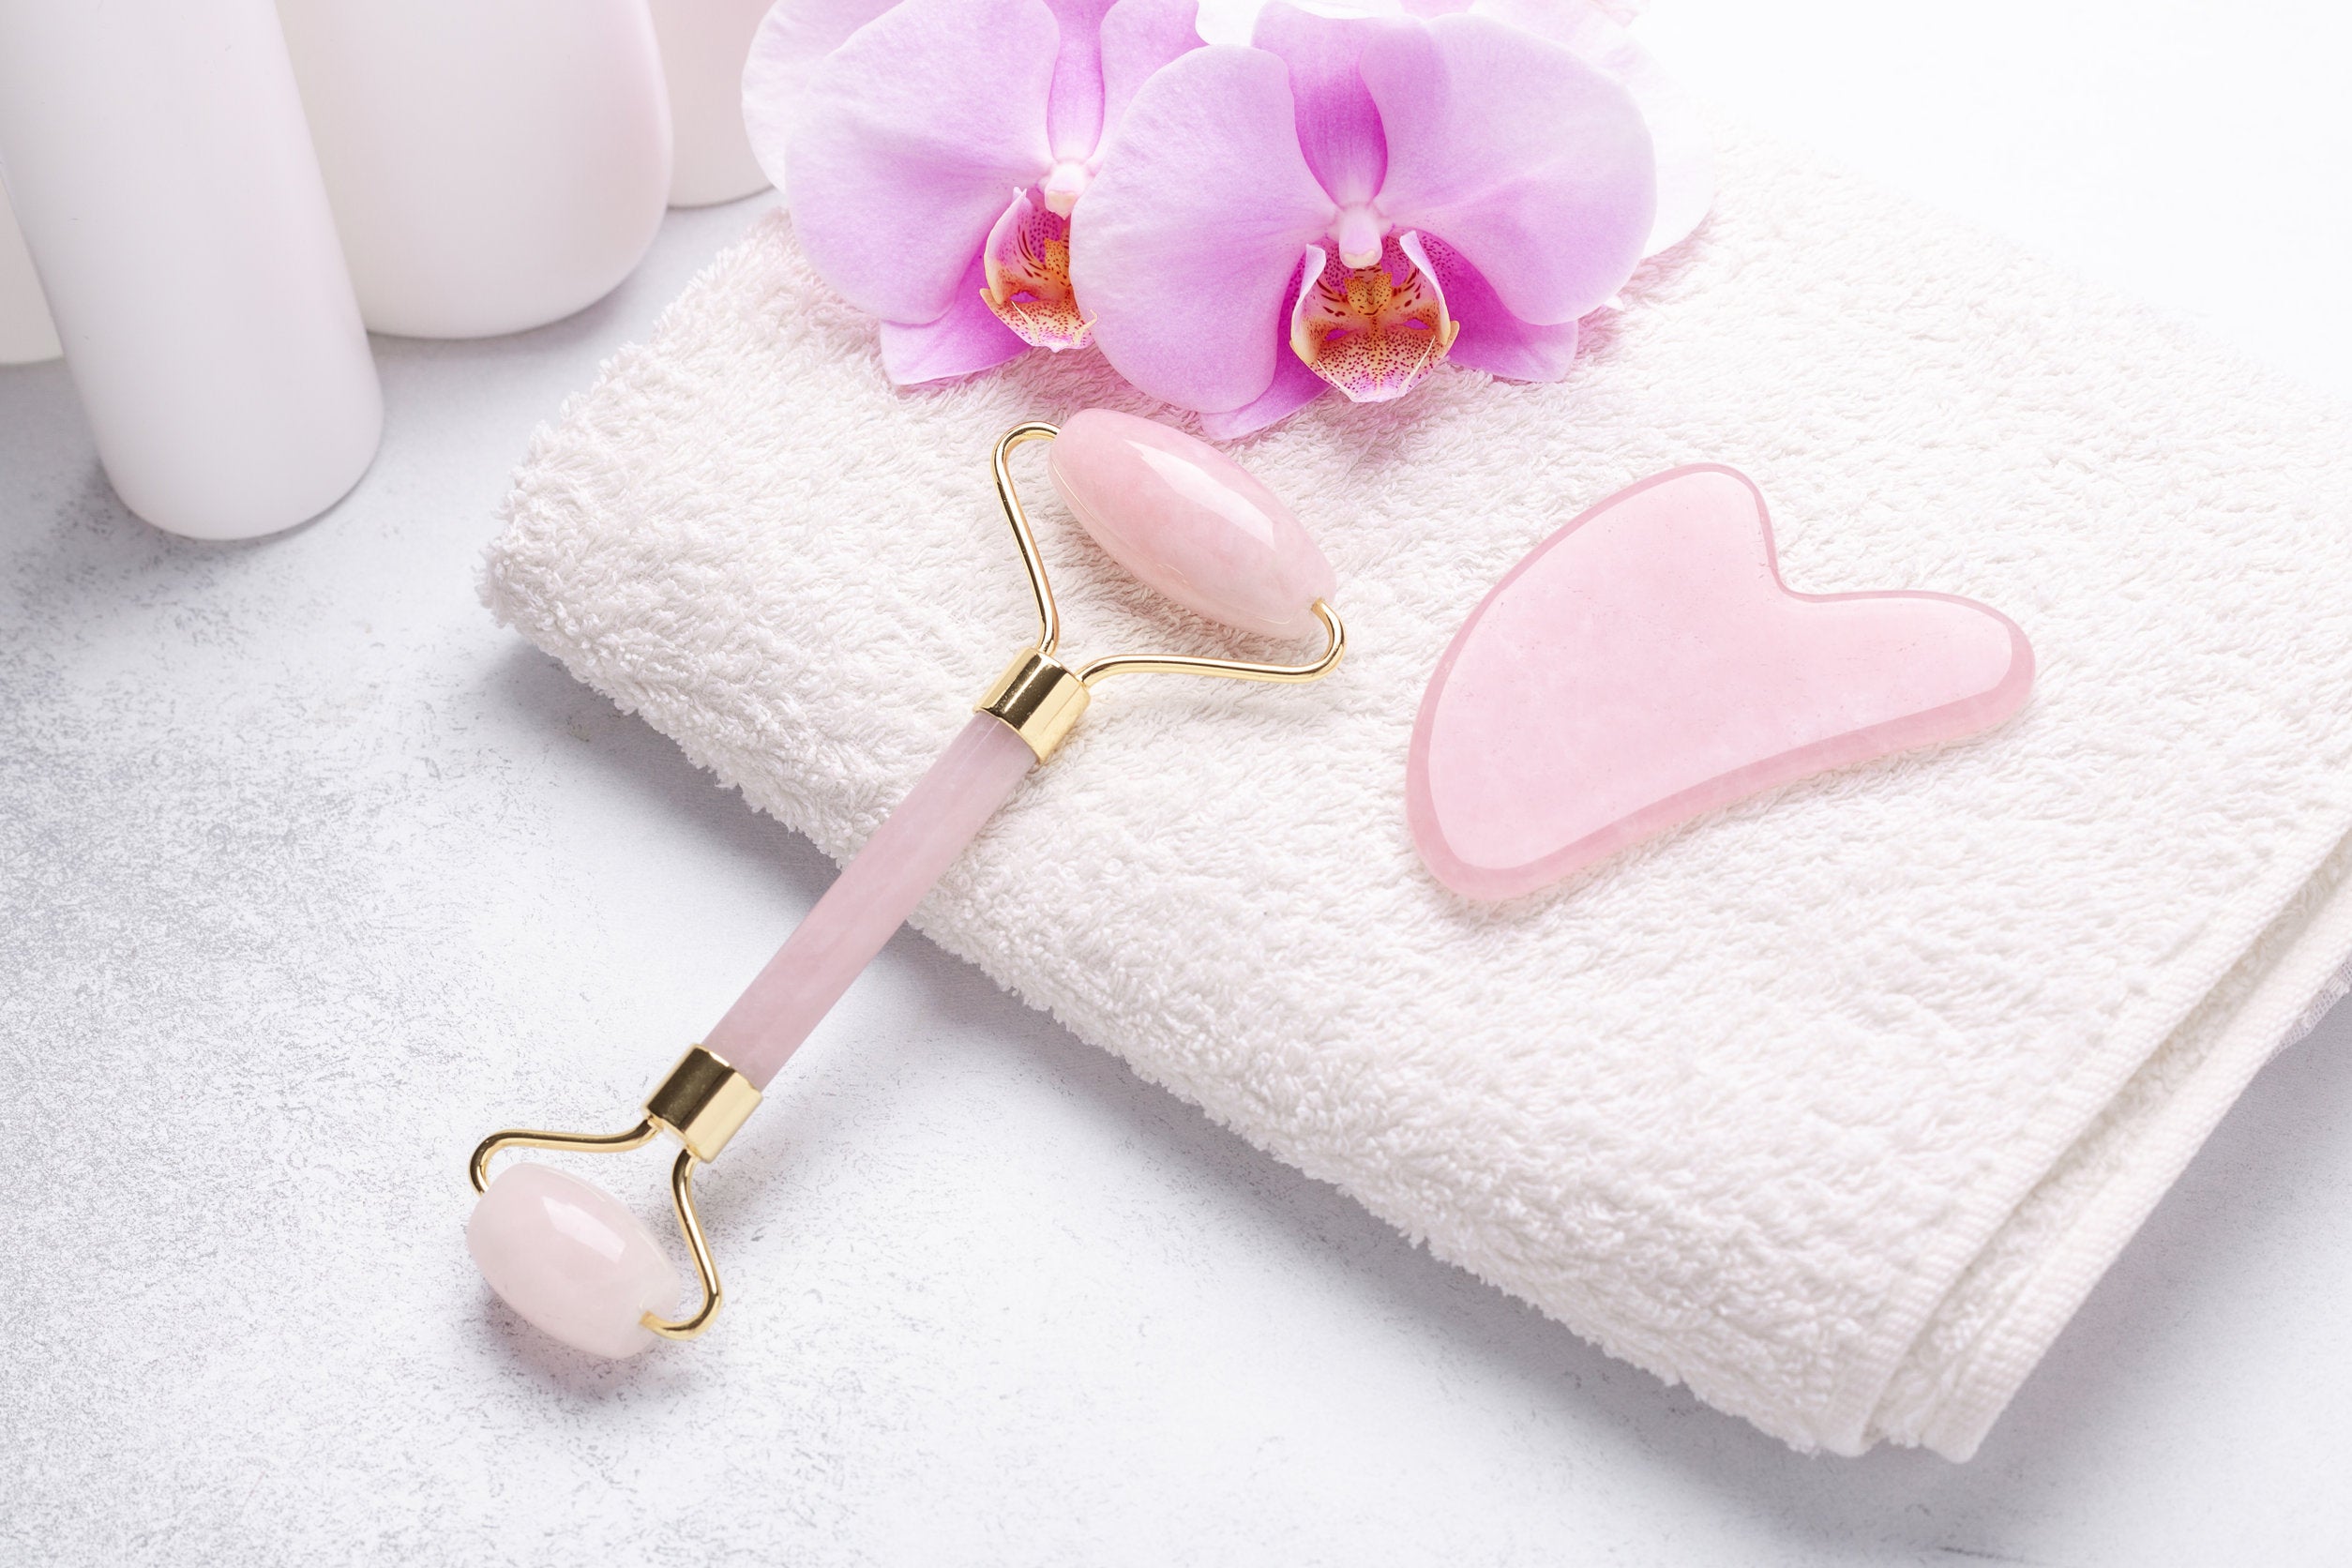 What Are the Benefits of Gua Sha – The Ultimate TikTok Massage Tool For Smooth Skin